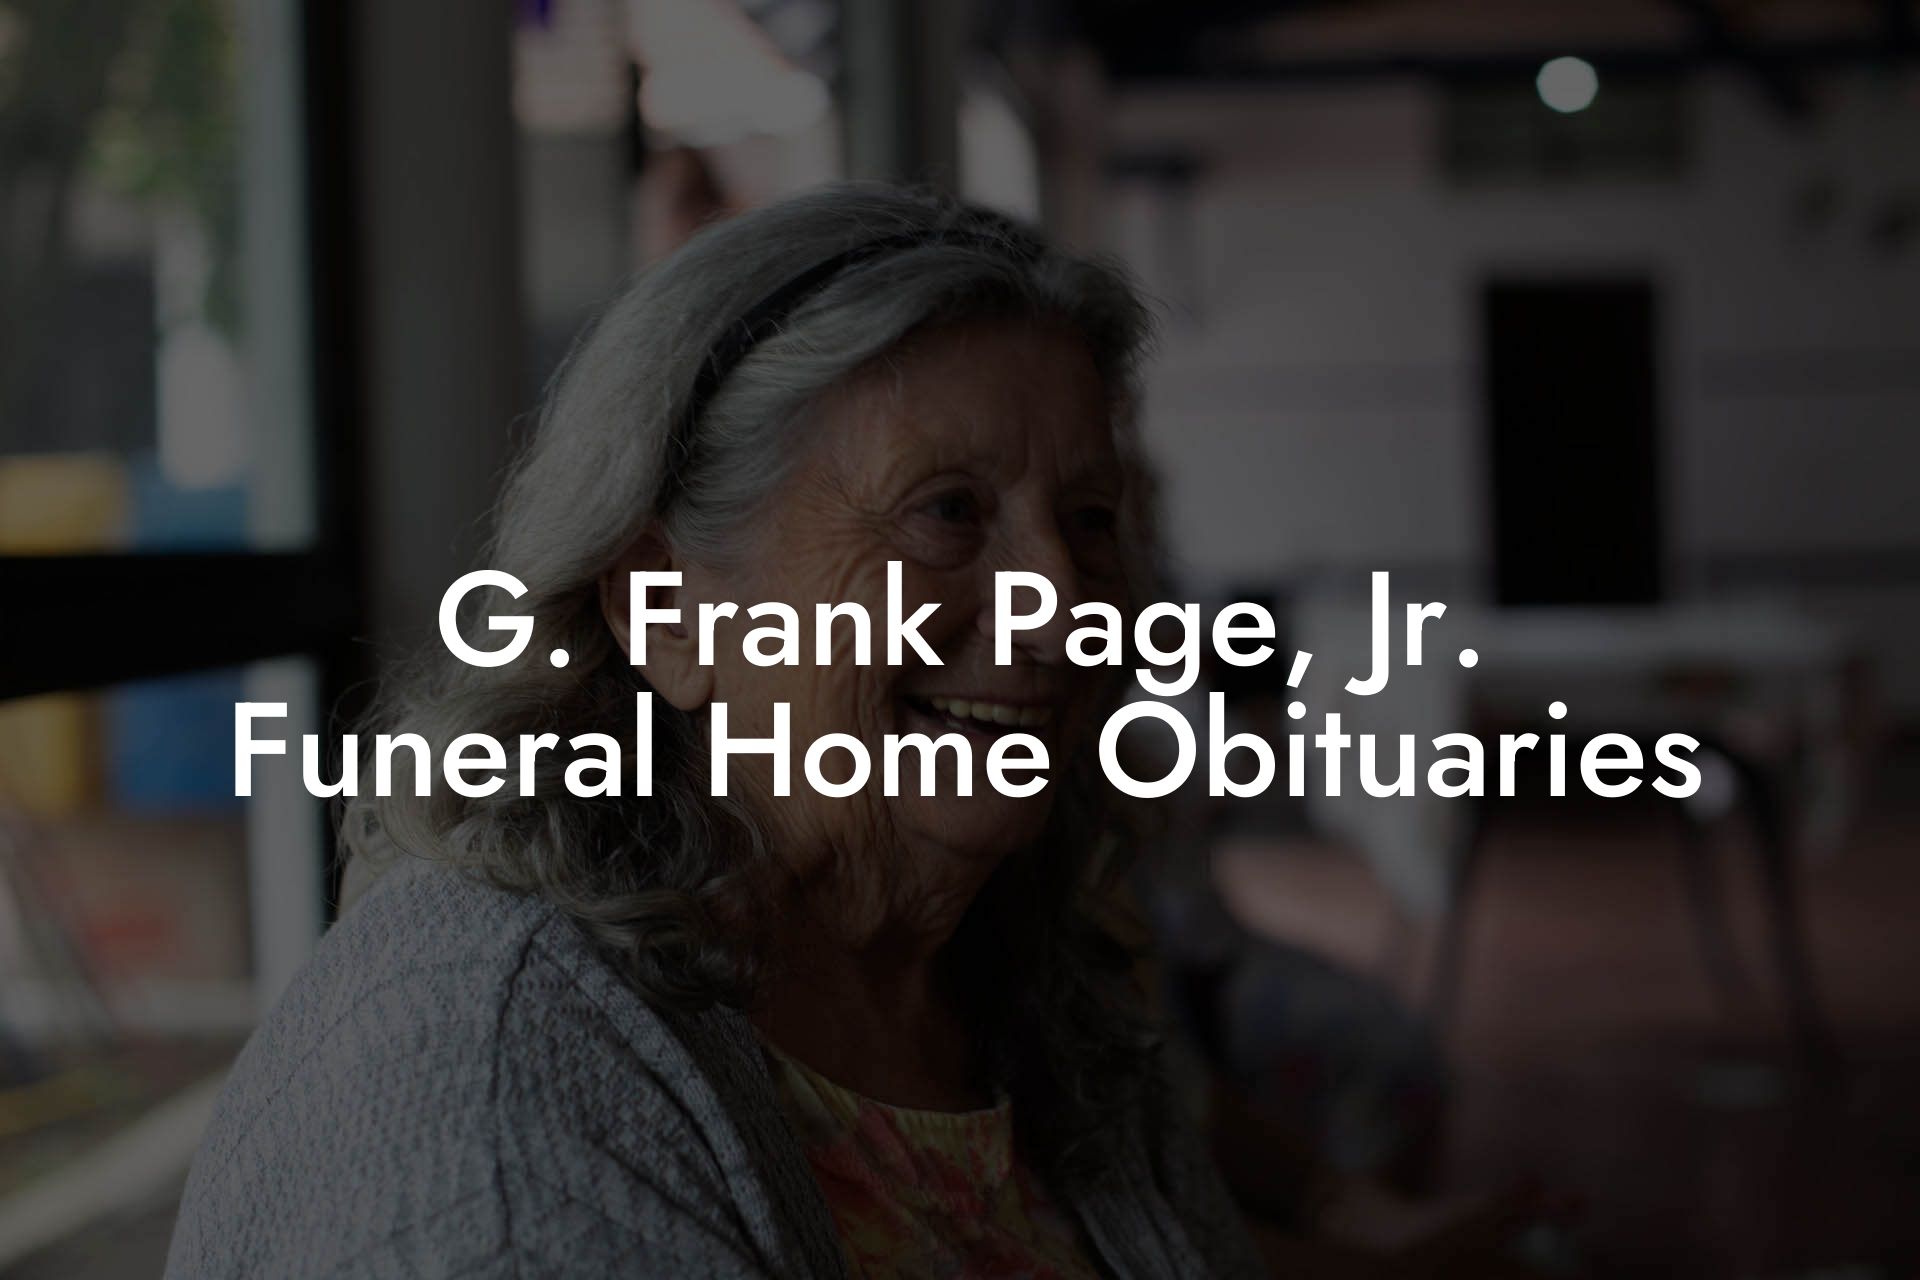 G. Frank Page, Jr. Funeral Home Obituaries